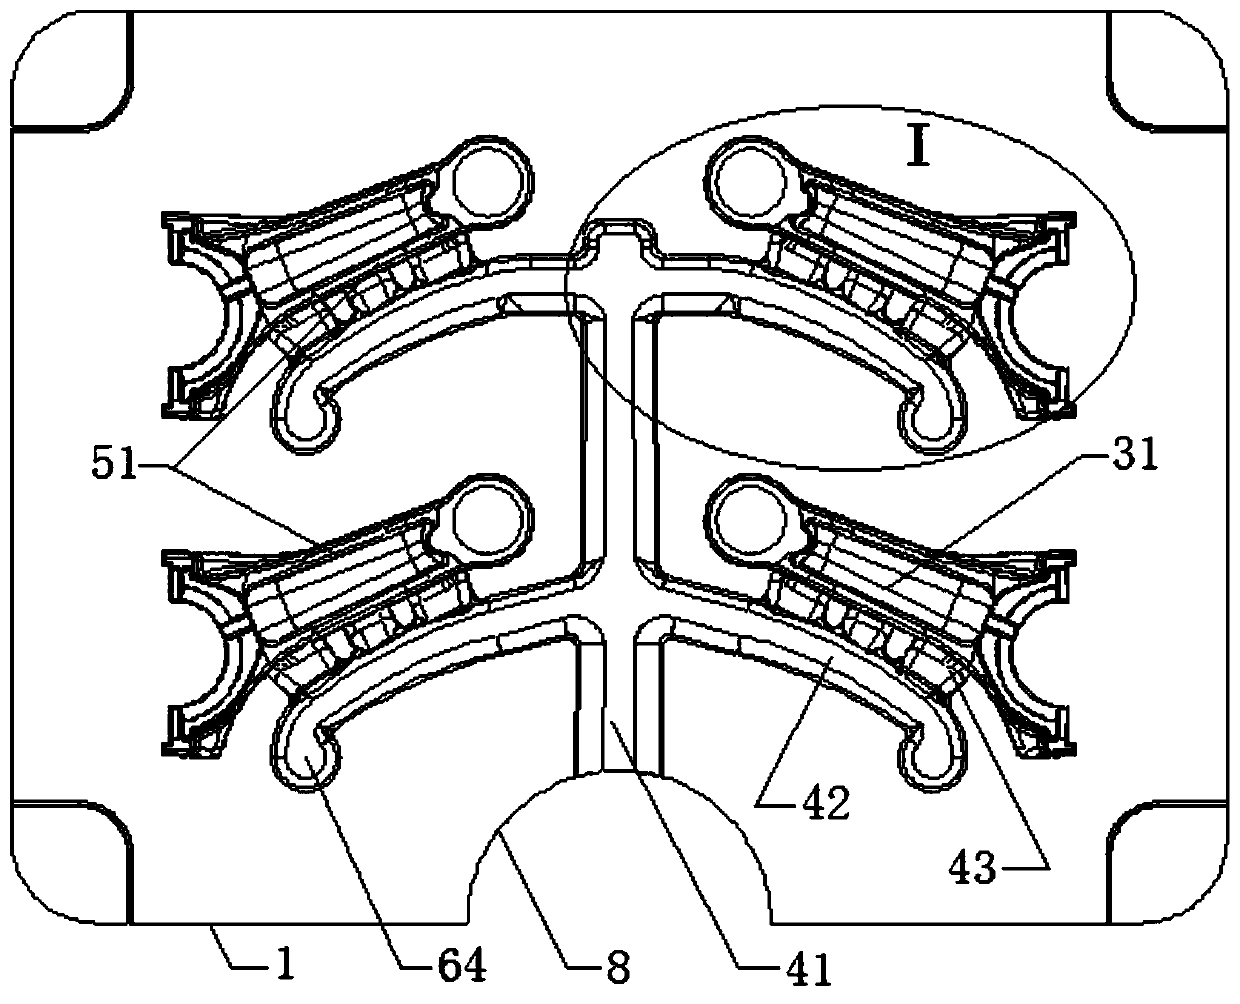 Die casting mold with connecting rod body cavity liquid inlet multi-flow channel structure